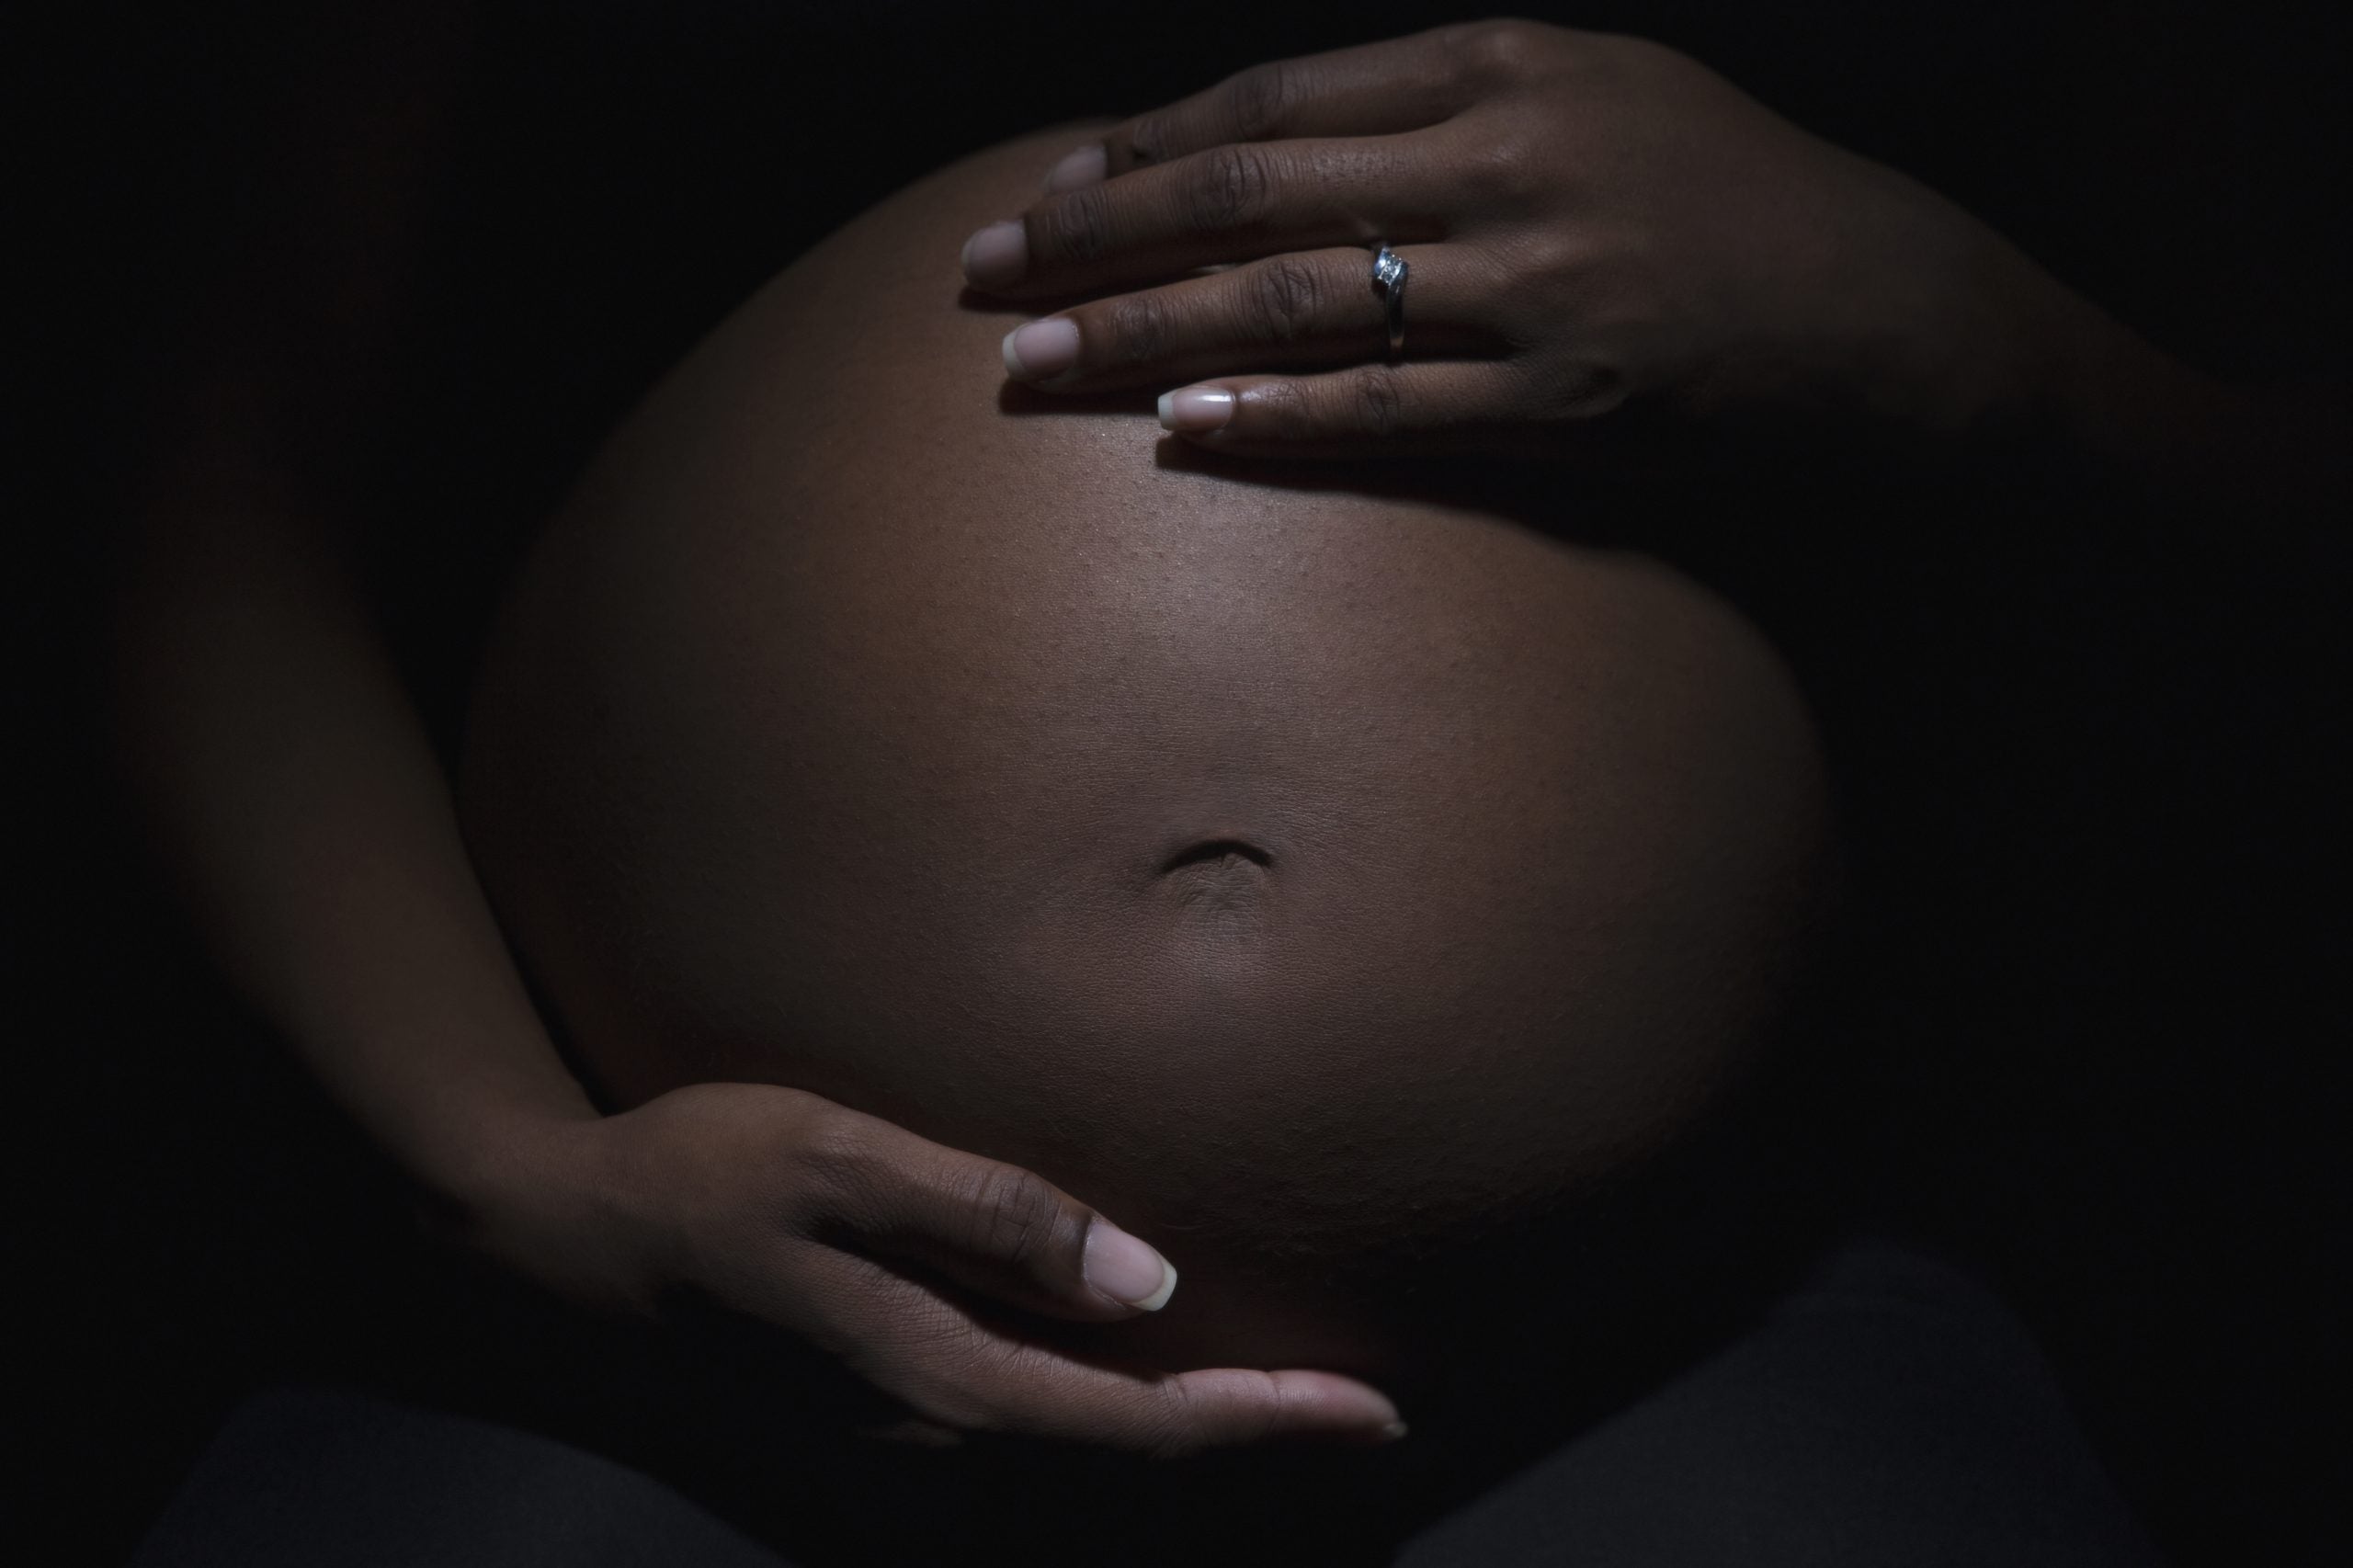 Black Women Are Leading The Fight For Respectful Maternity Care During COVID-19 Crisis And Beyond